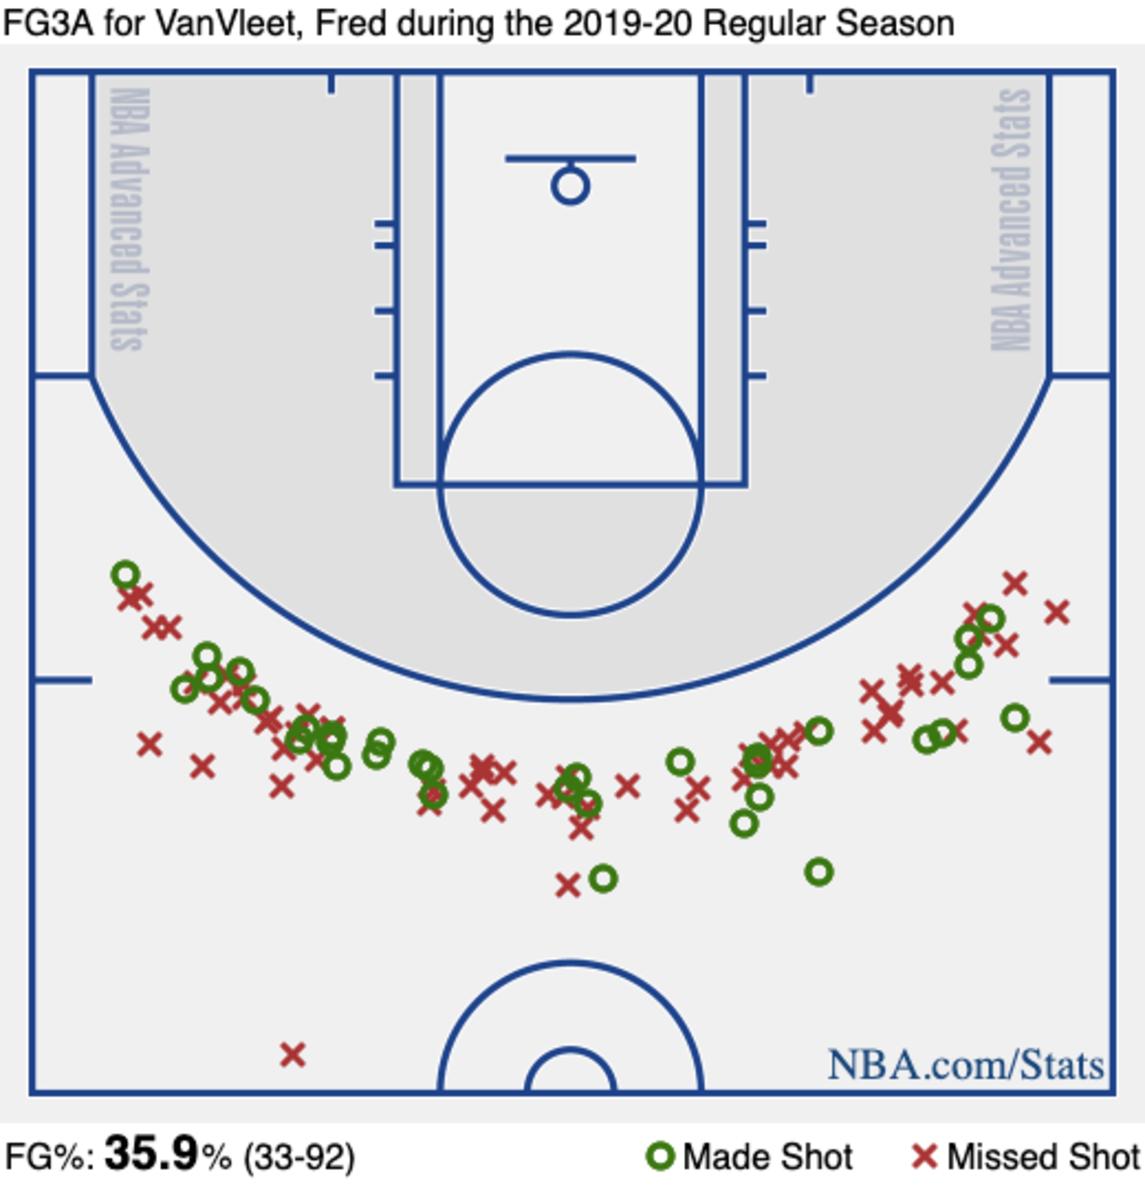 Fred VanVleet's 2019-20 3-point shooting from 27 feet away from the rim.